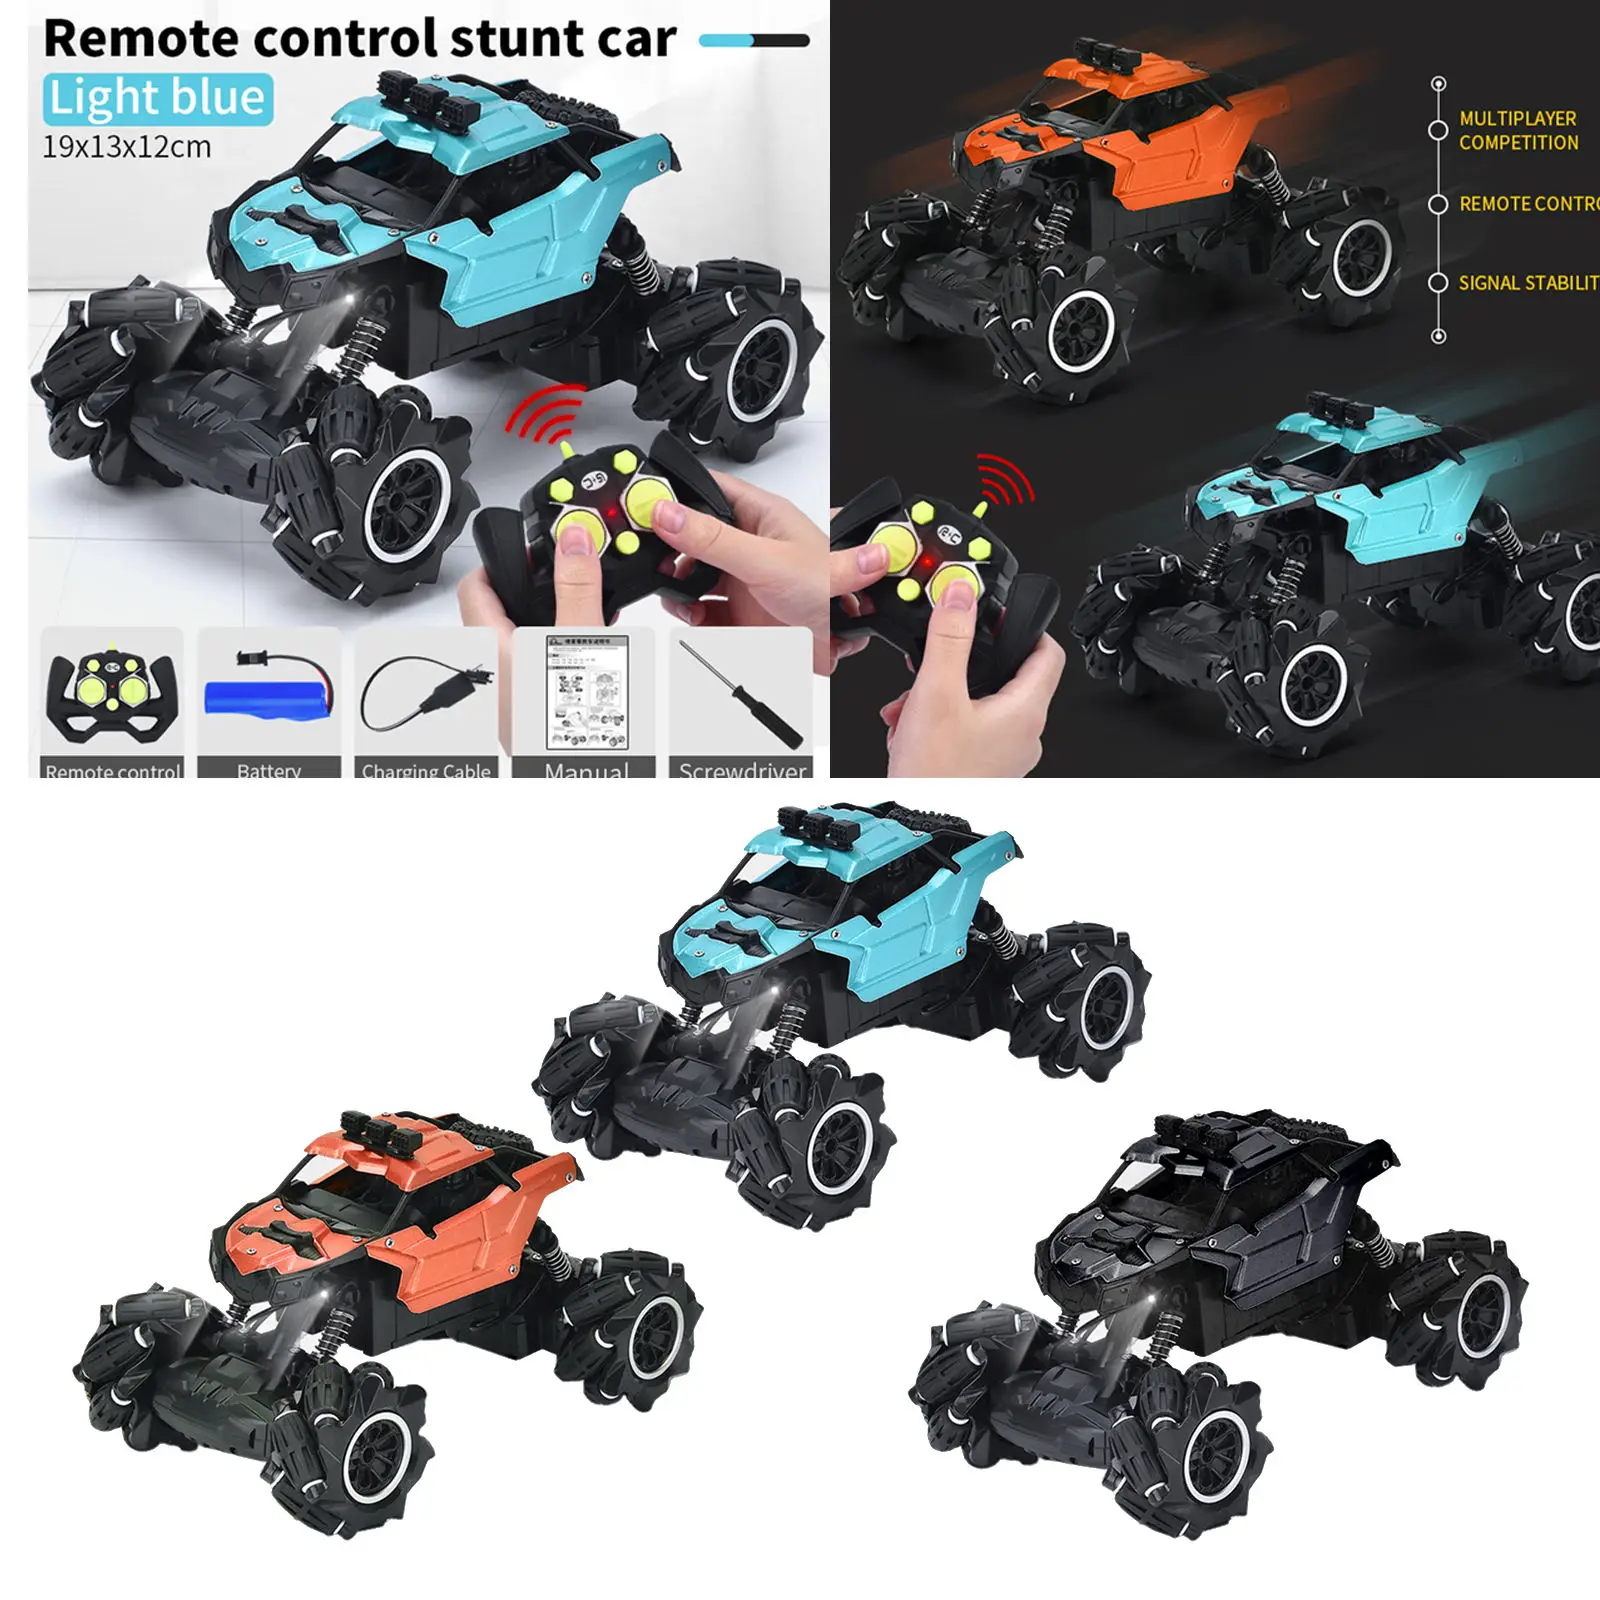 Stunt Remote Control RC Car Four-Wheel DriveVersion Toy 30 Min Play TimeFor 6+ Children andAdults Electric Car Child